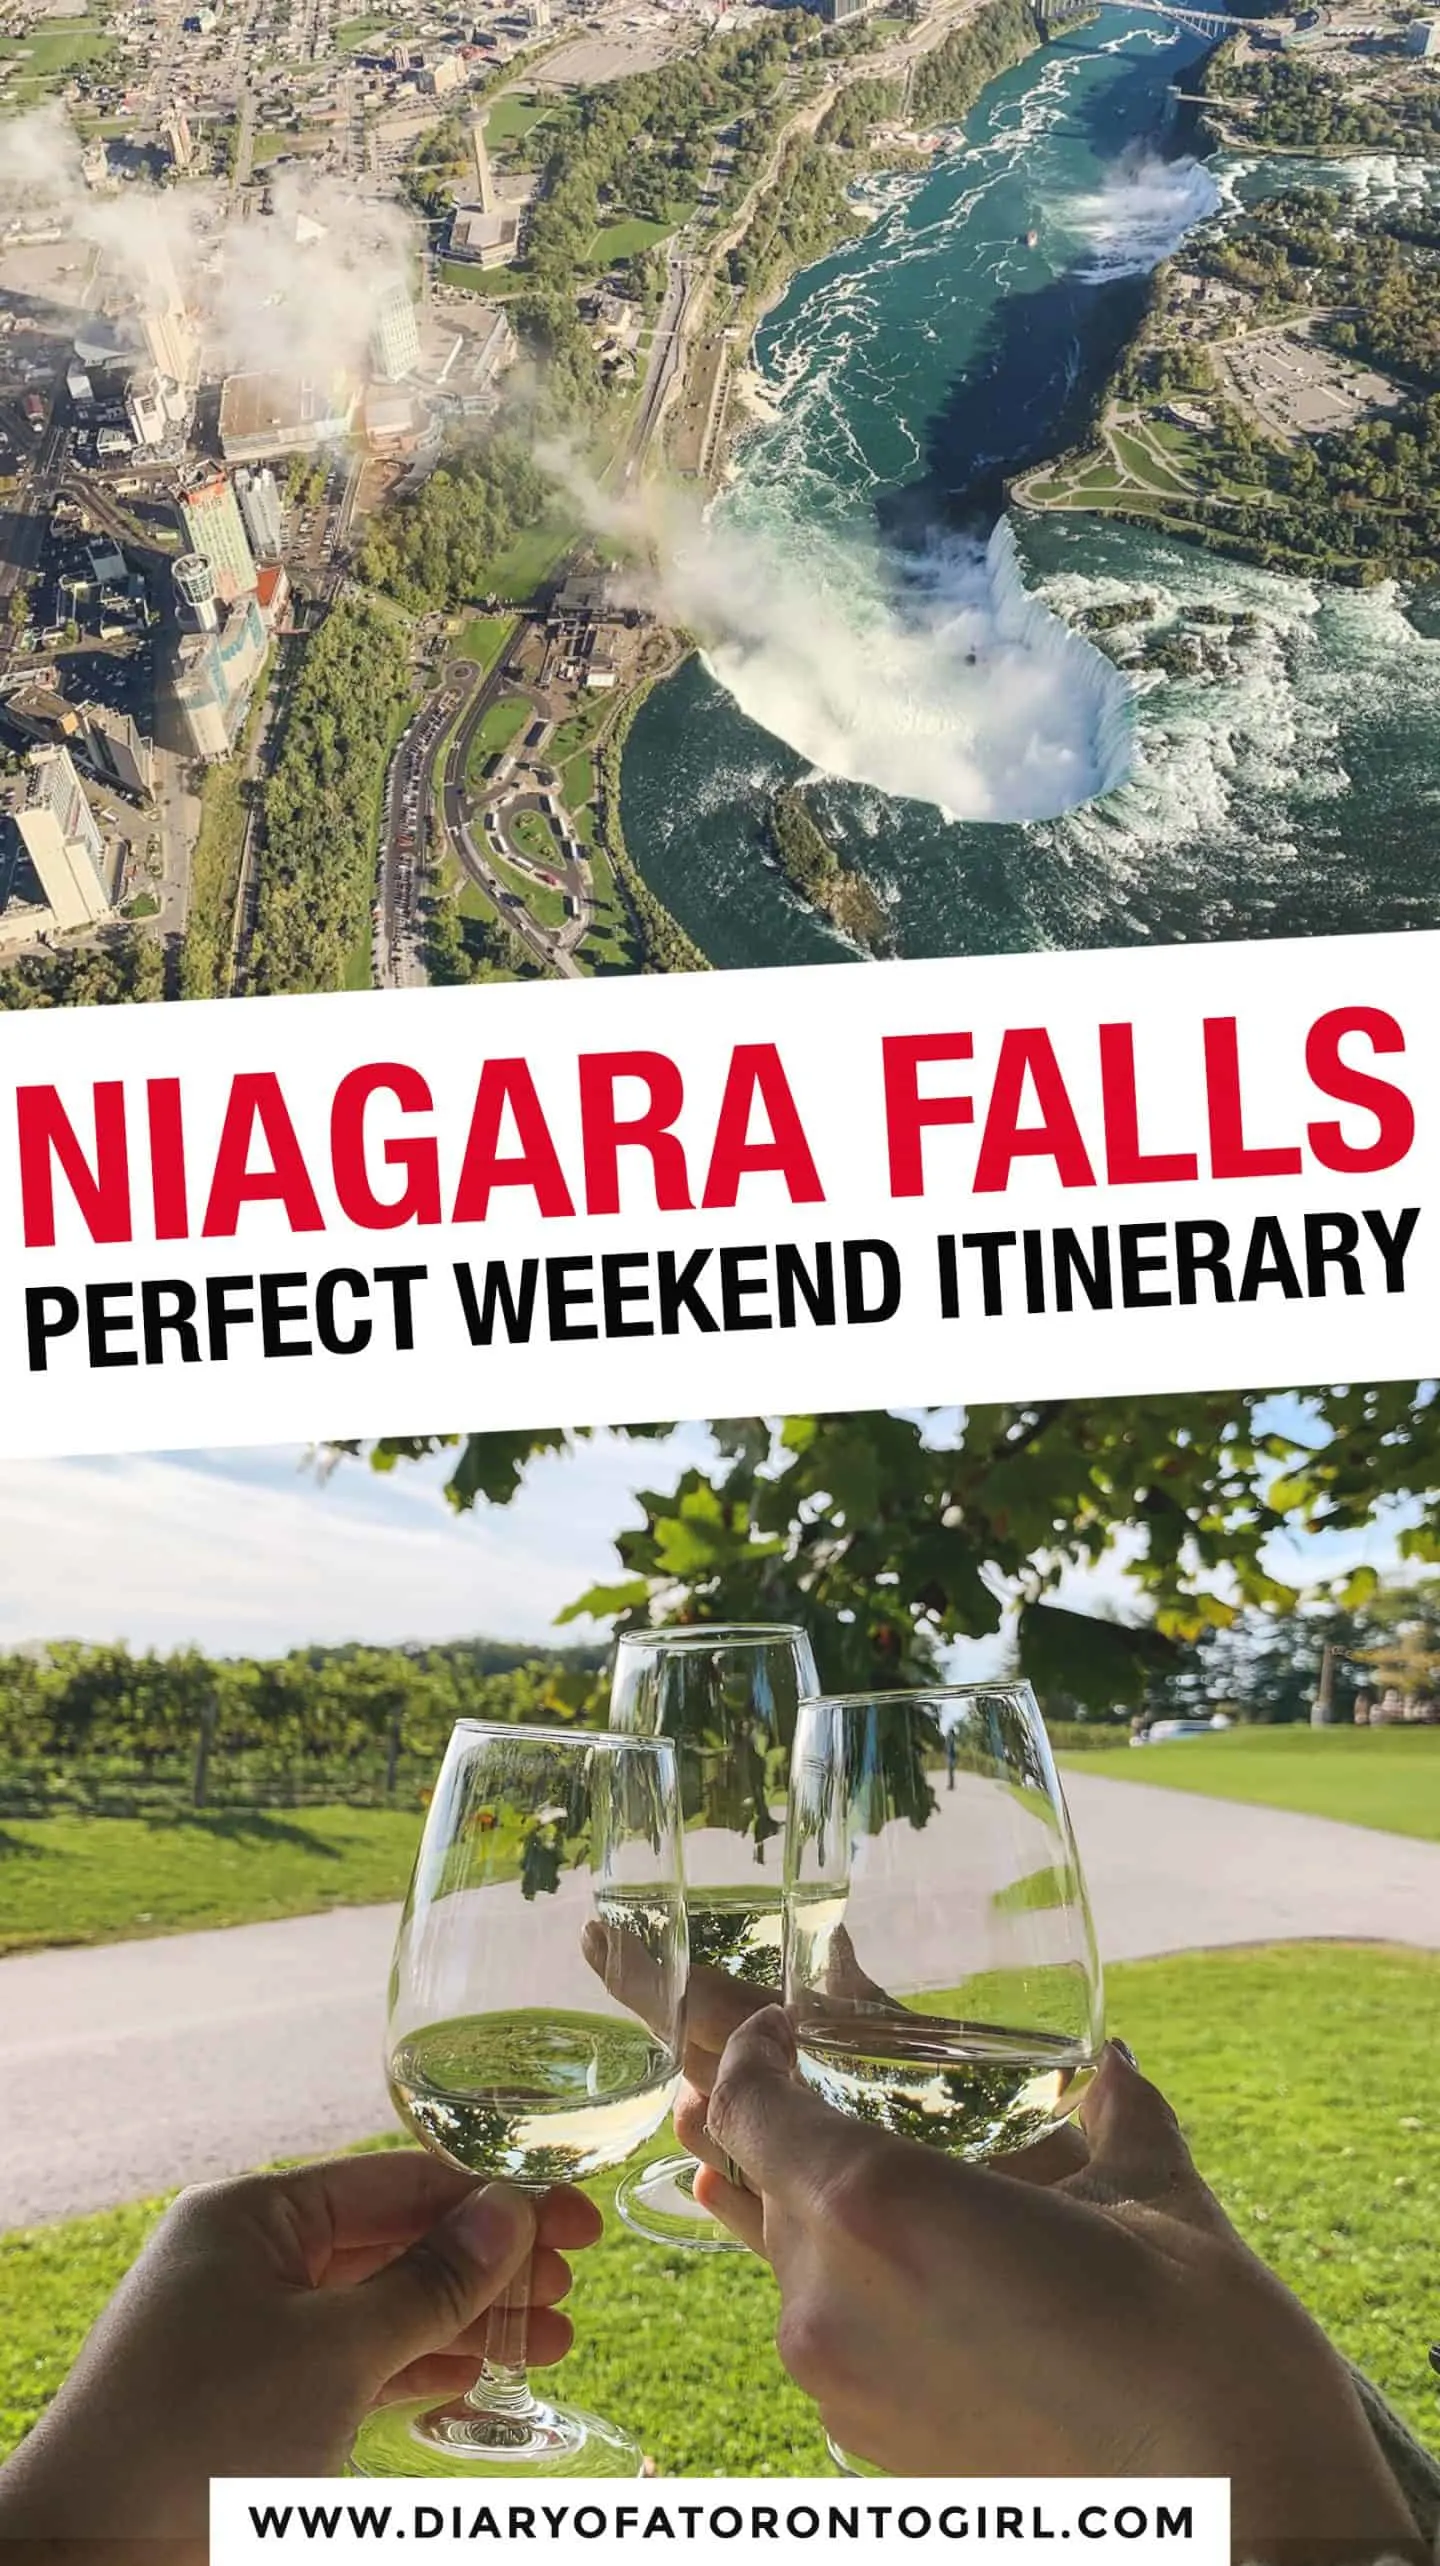 Planning a visit to Niagara Falls on the Canadian side? Here's the ultimate travel itinerary and guide on how to spend the perfect weekend in Niagara Falls, Ontario!